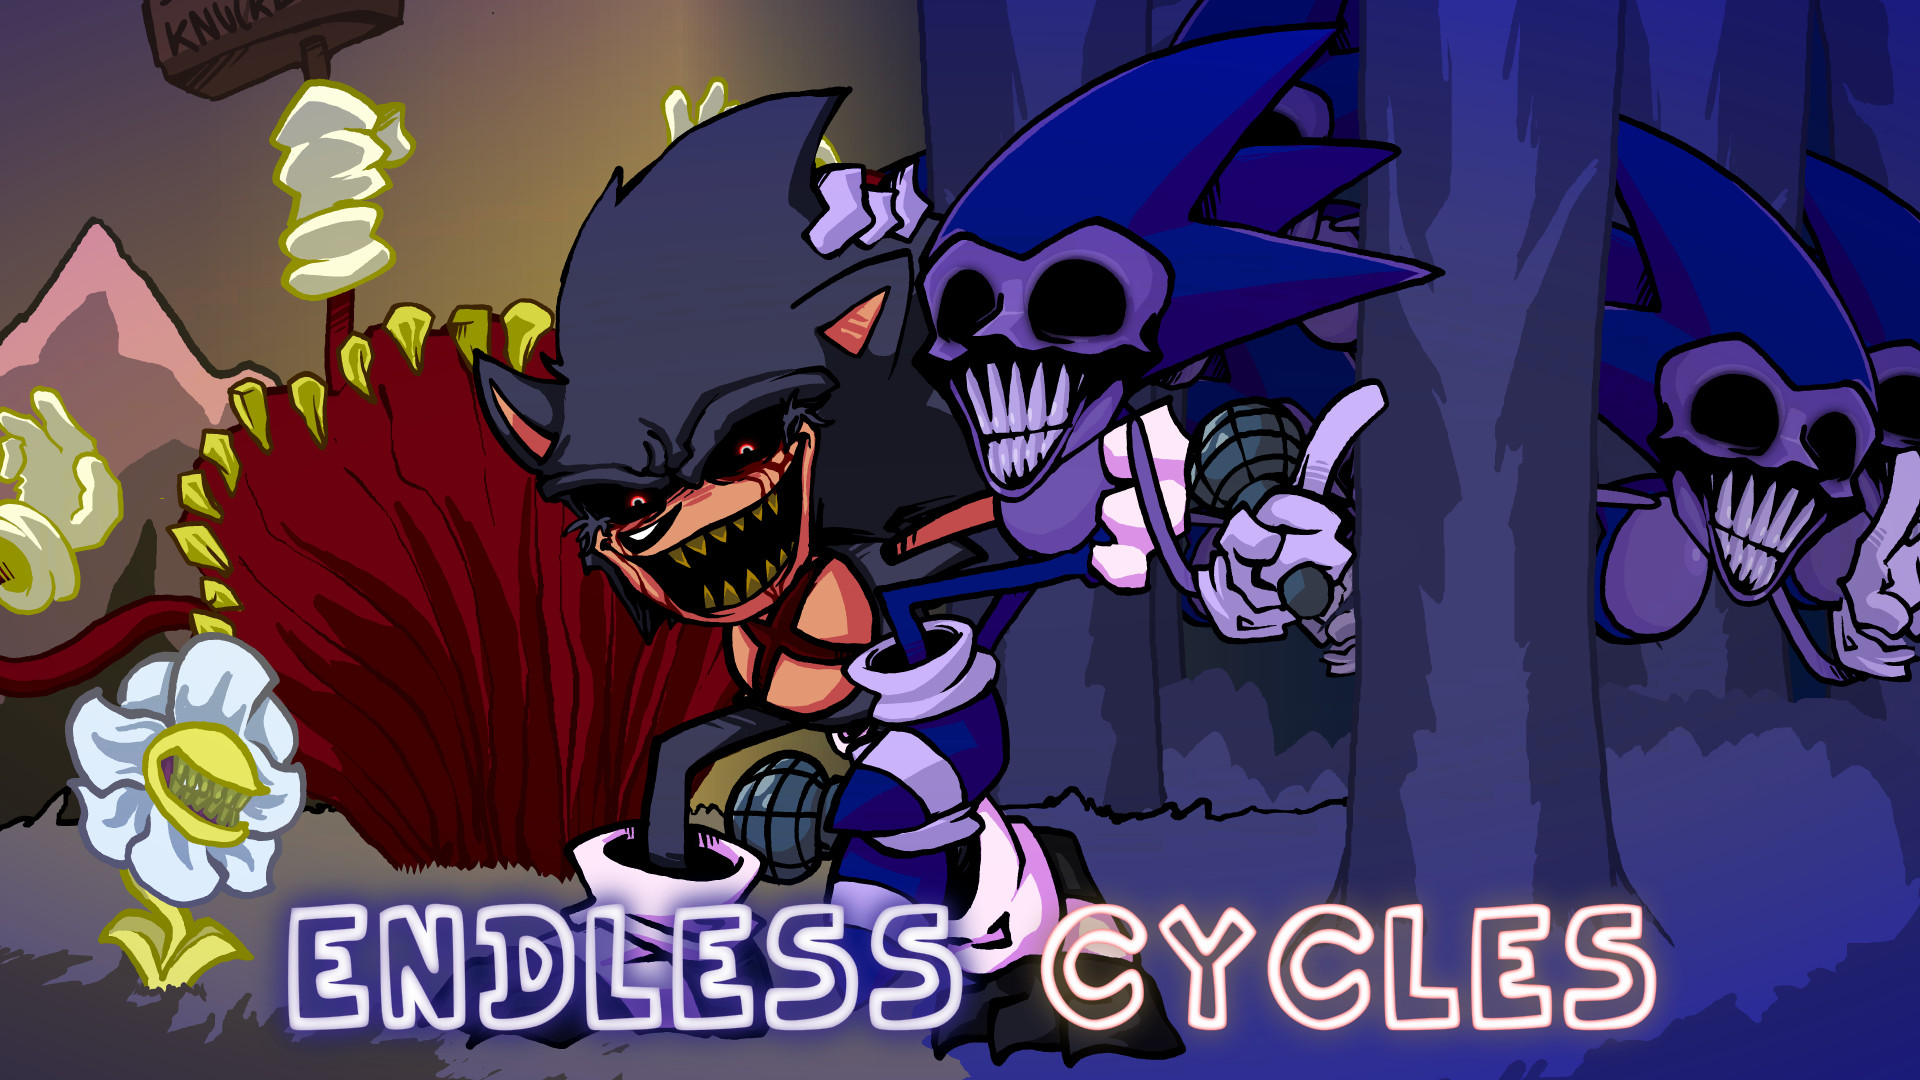 Playable Lord X Sonic (in-game size) [Friday Night Funkin'] [Mods]